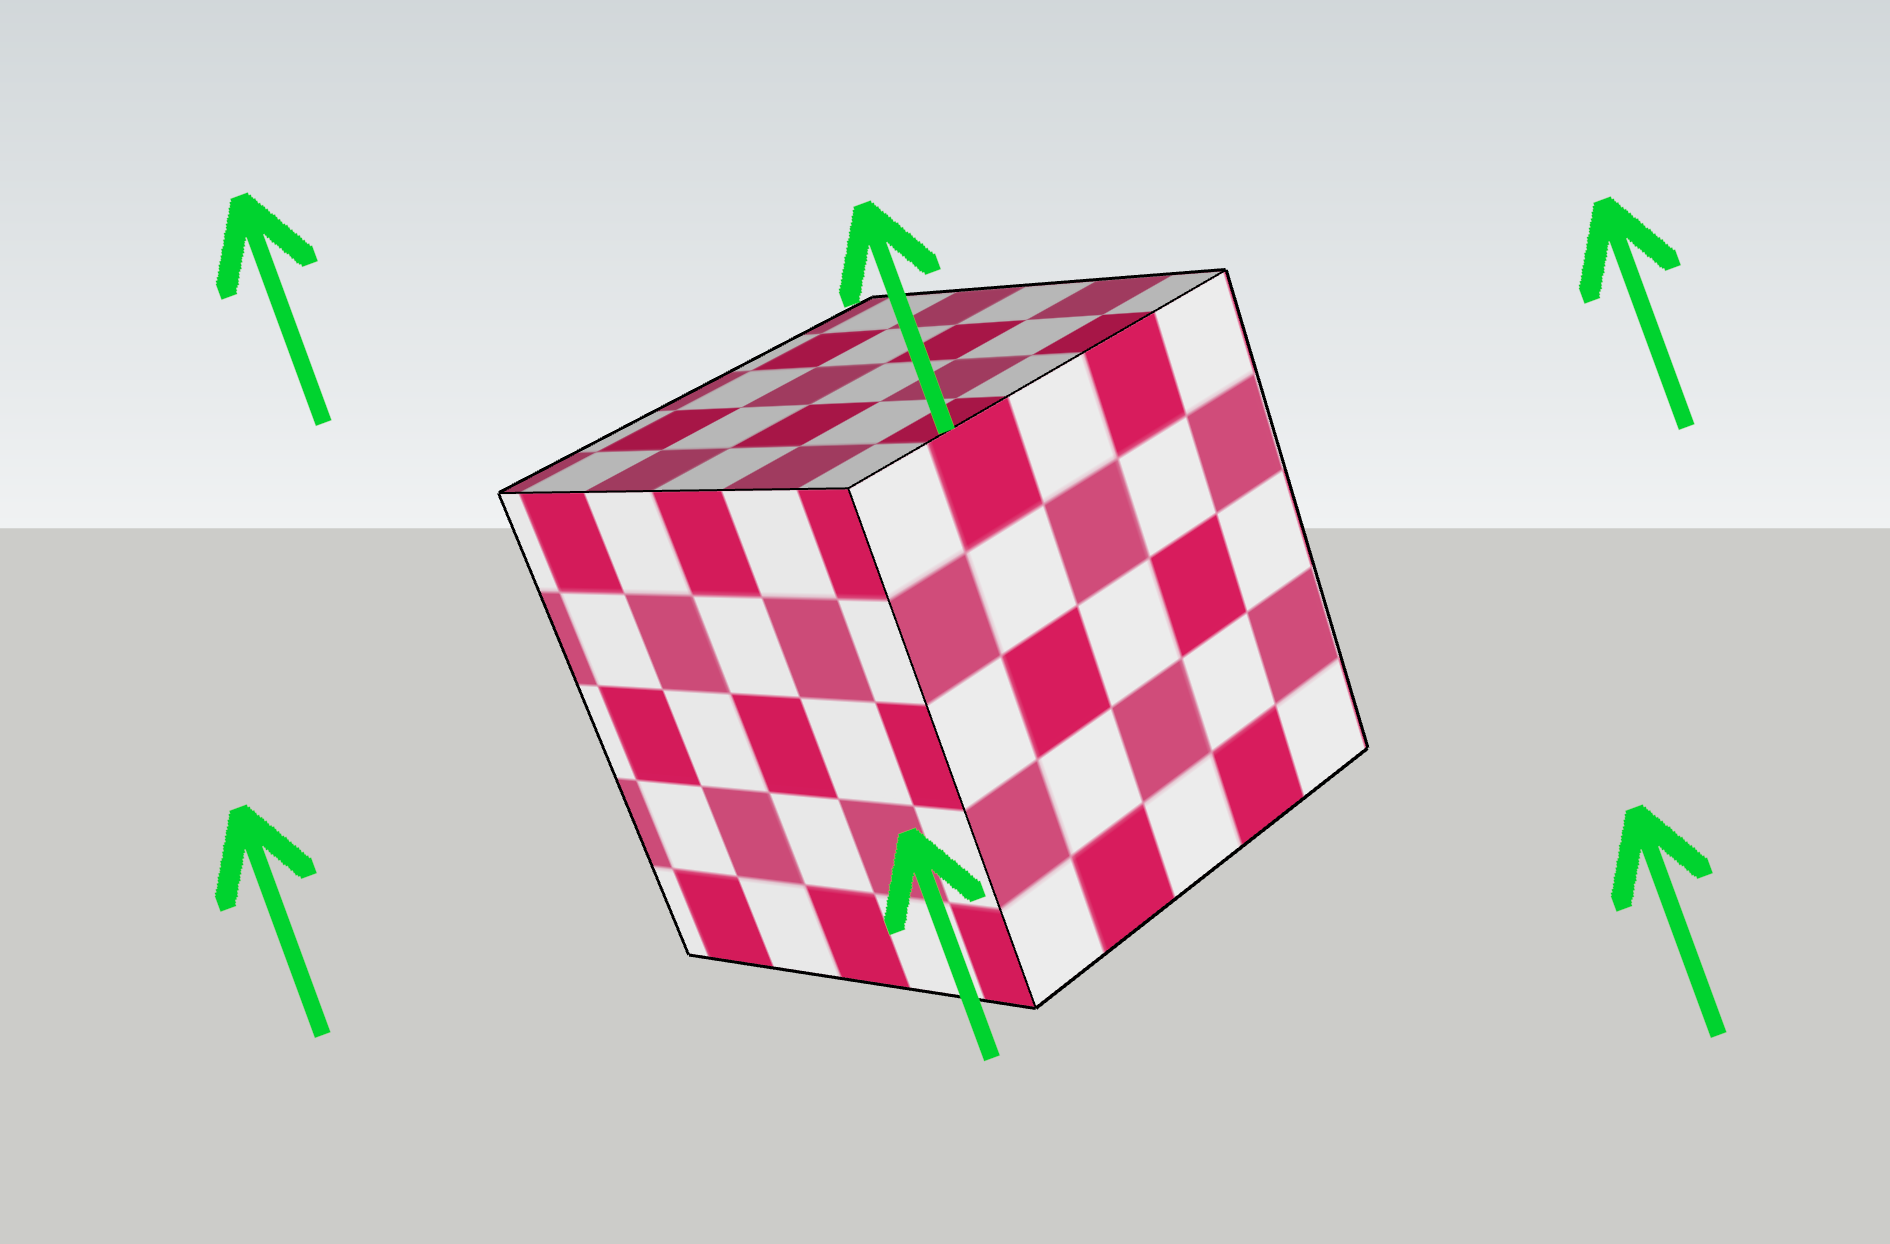 A diagram of a cube, with green arrows pointing up in object space